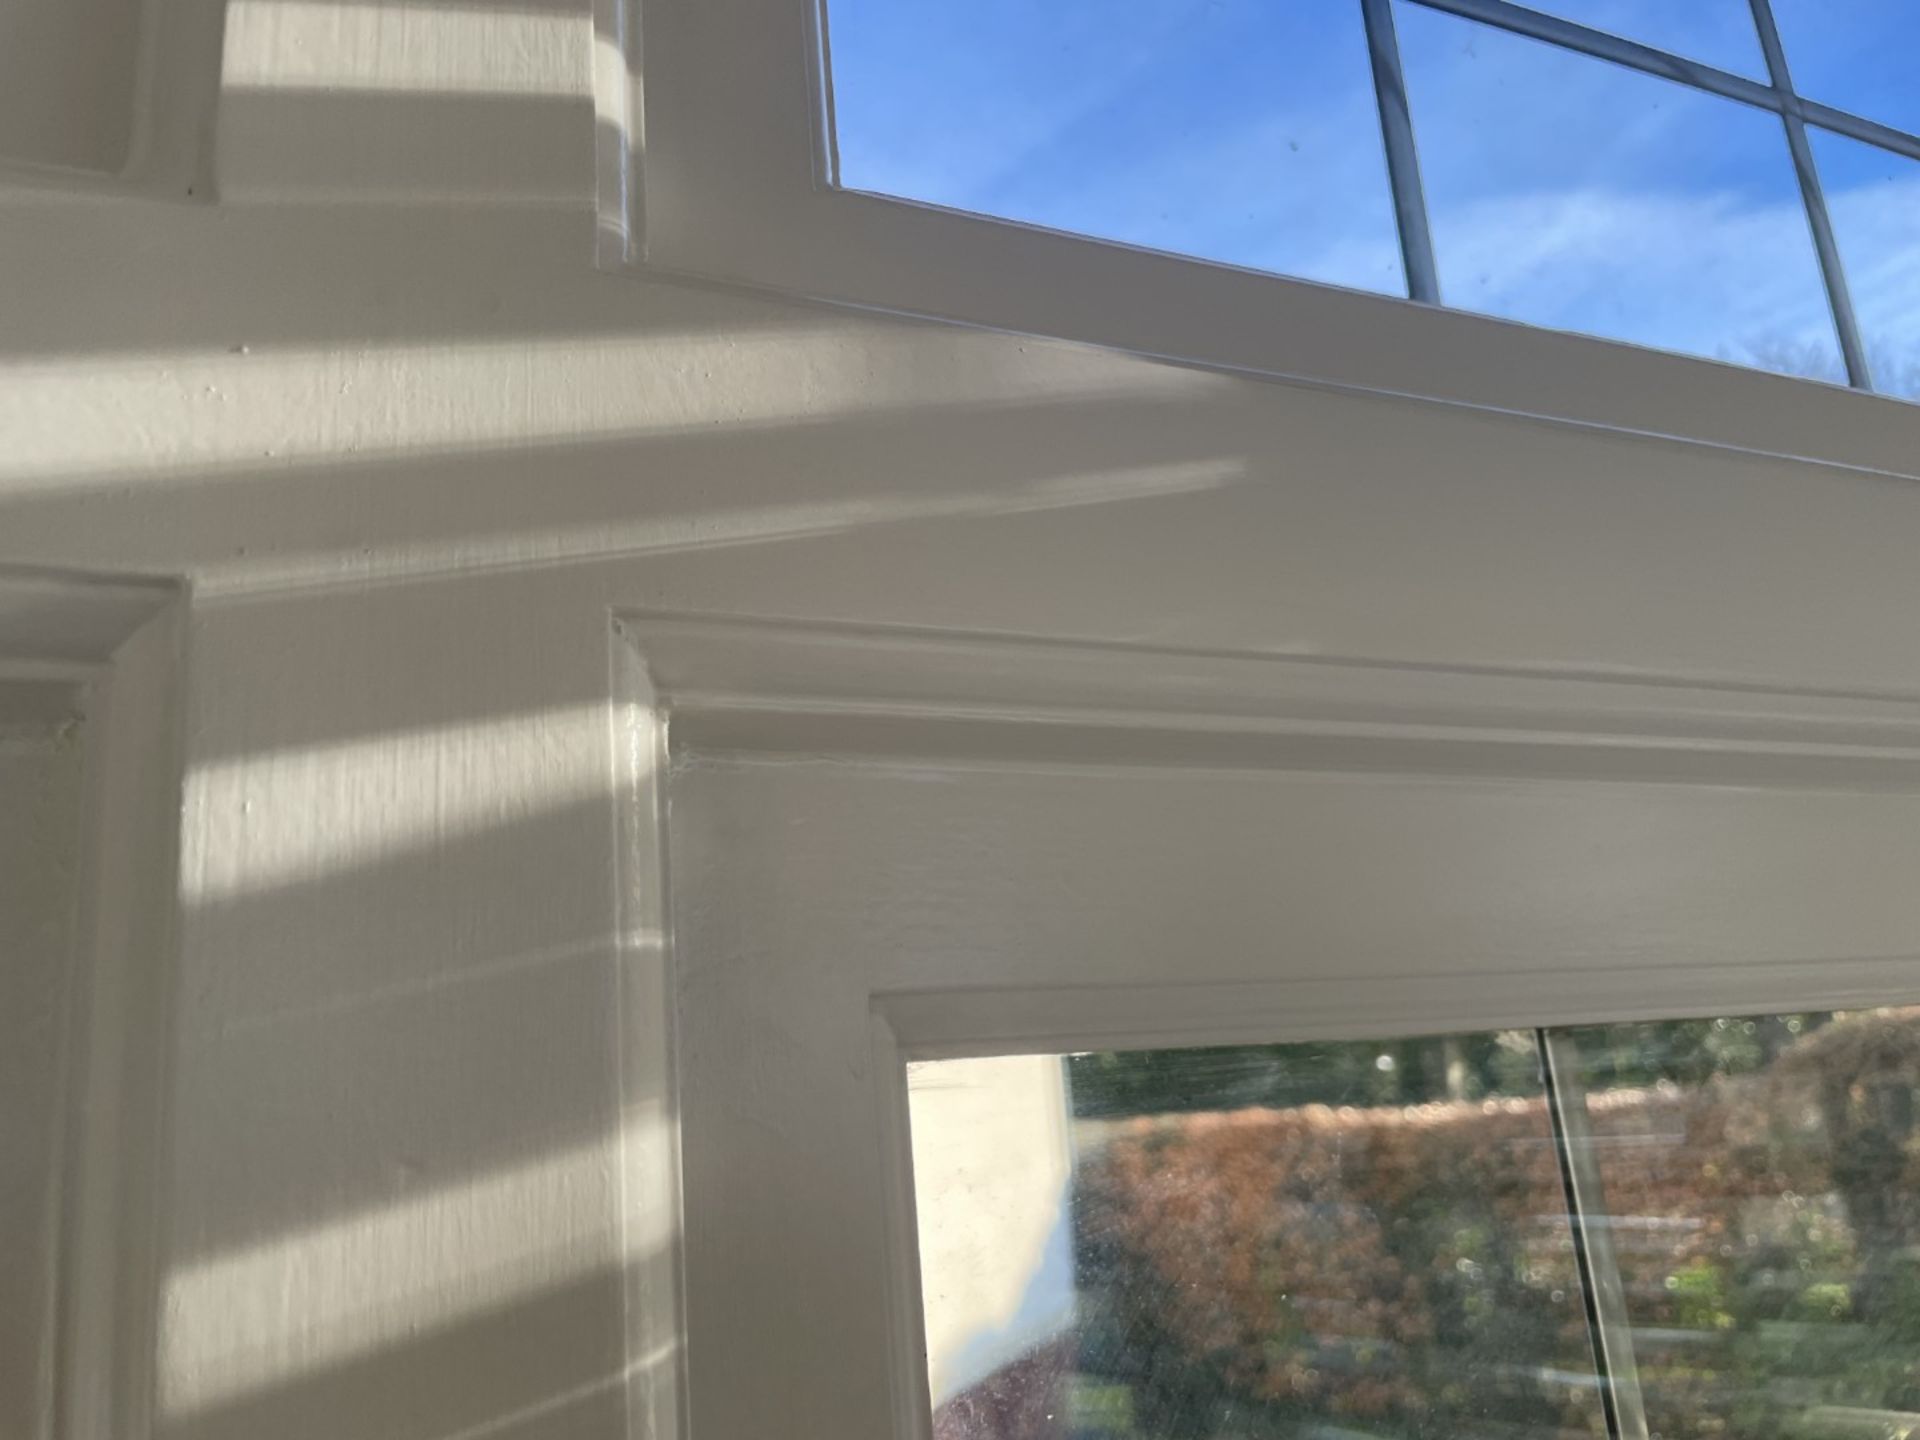 1 x Hardwood Timber Double Glazed Window Frames fitted with Shutter Blinds, In White - Image 10 of 24